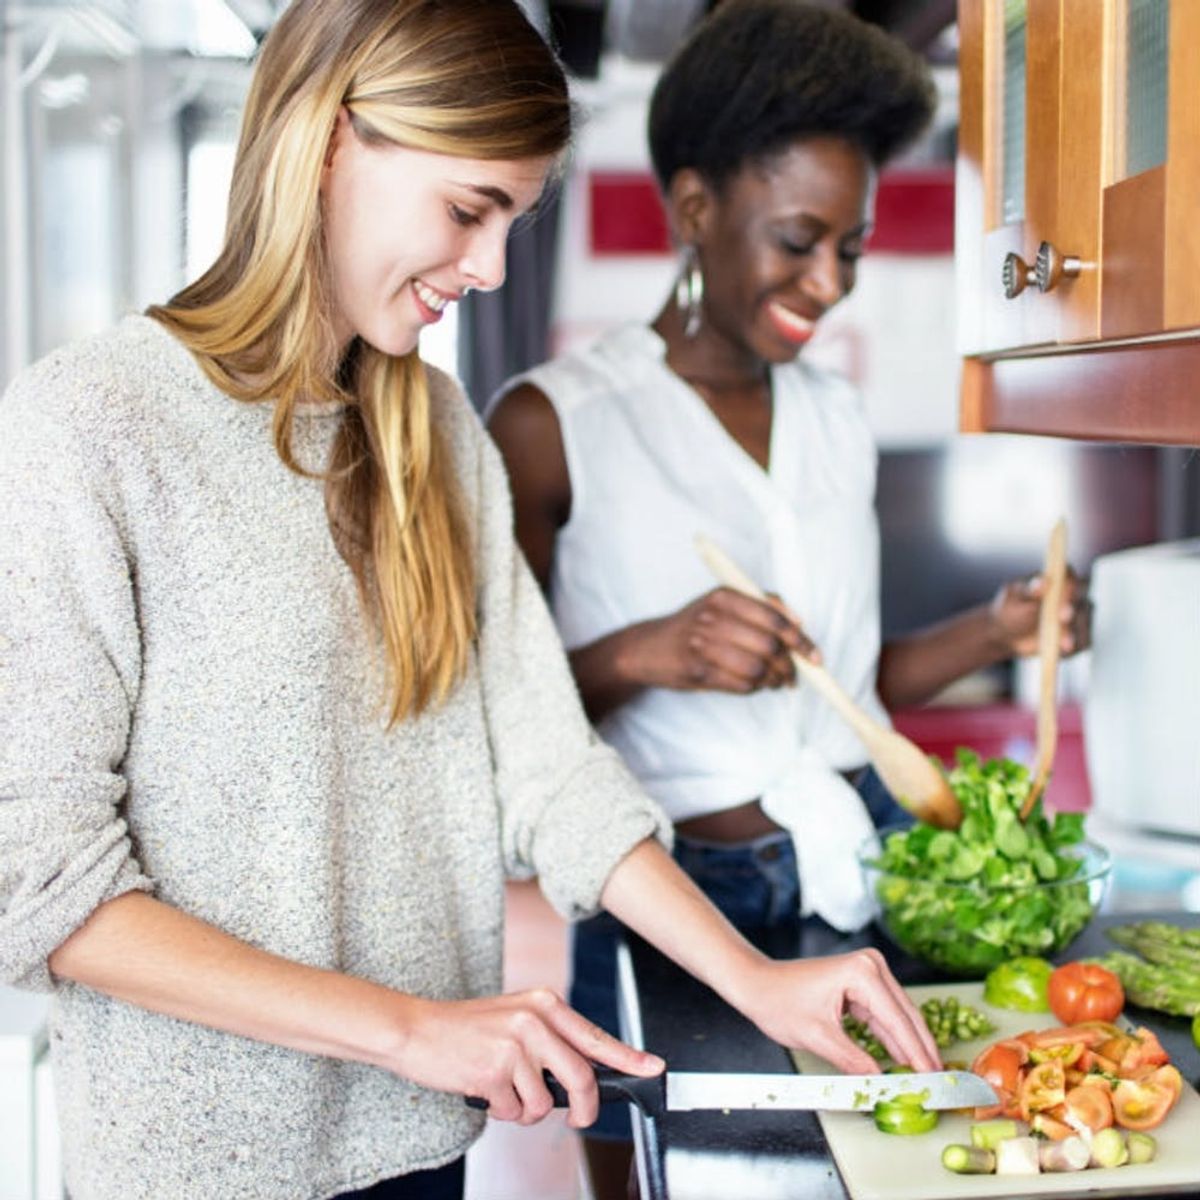 11 Easy Ways You Can Eat Healthier Right Now